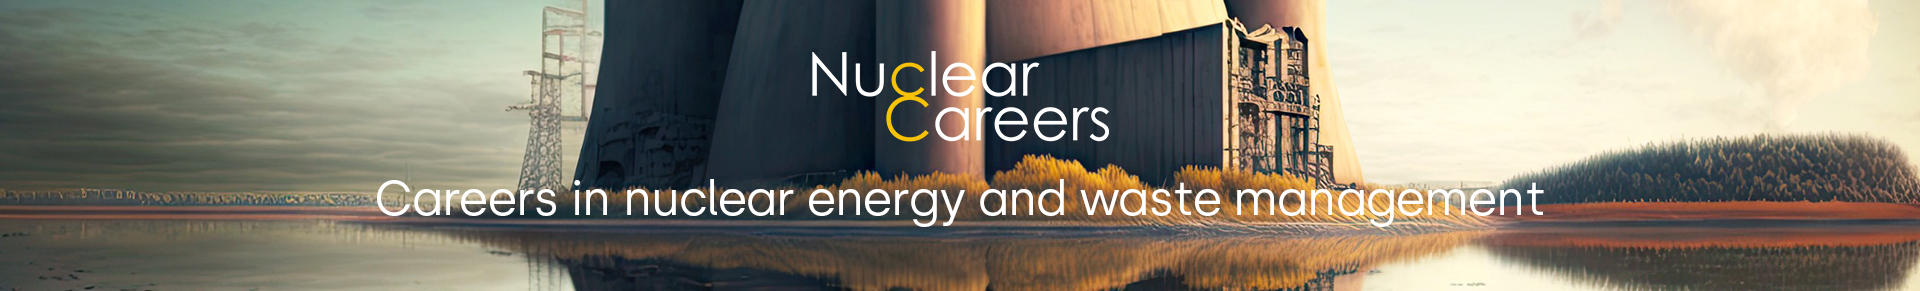 Careers in Nuclear Energy